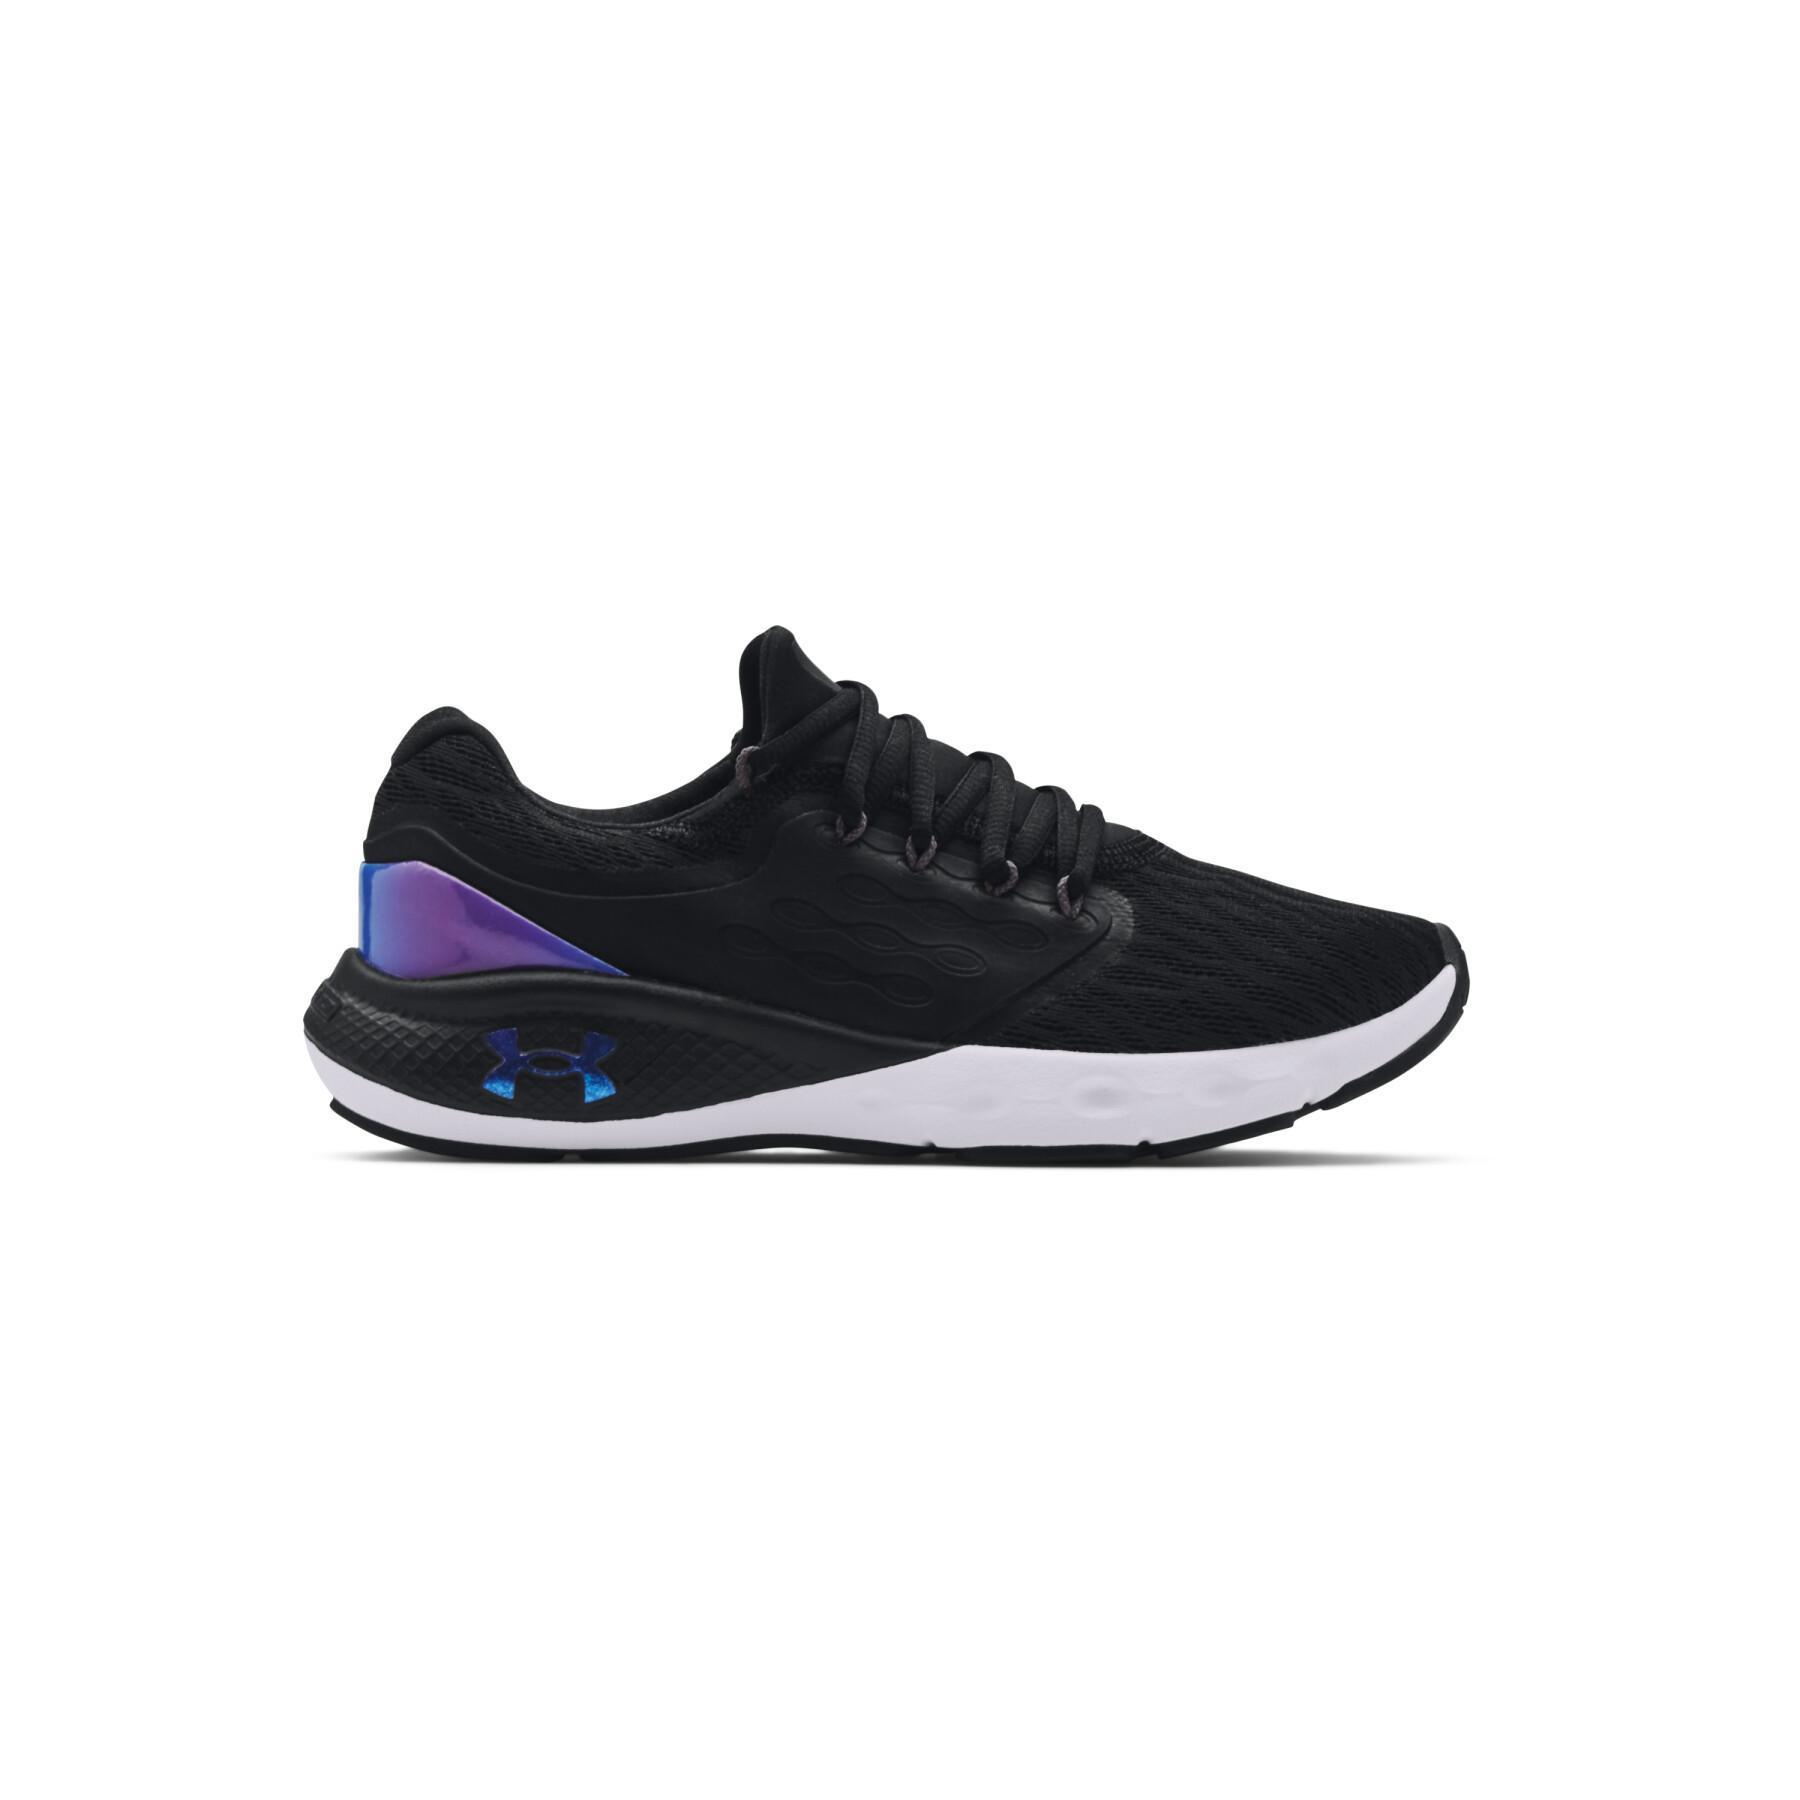 Chaussures de running femme Under Armour Charged Vantage Colorshift